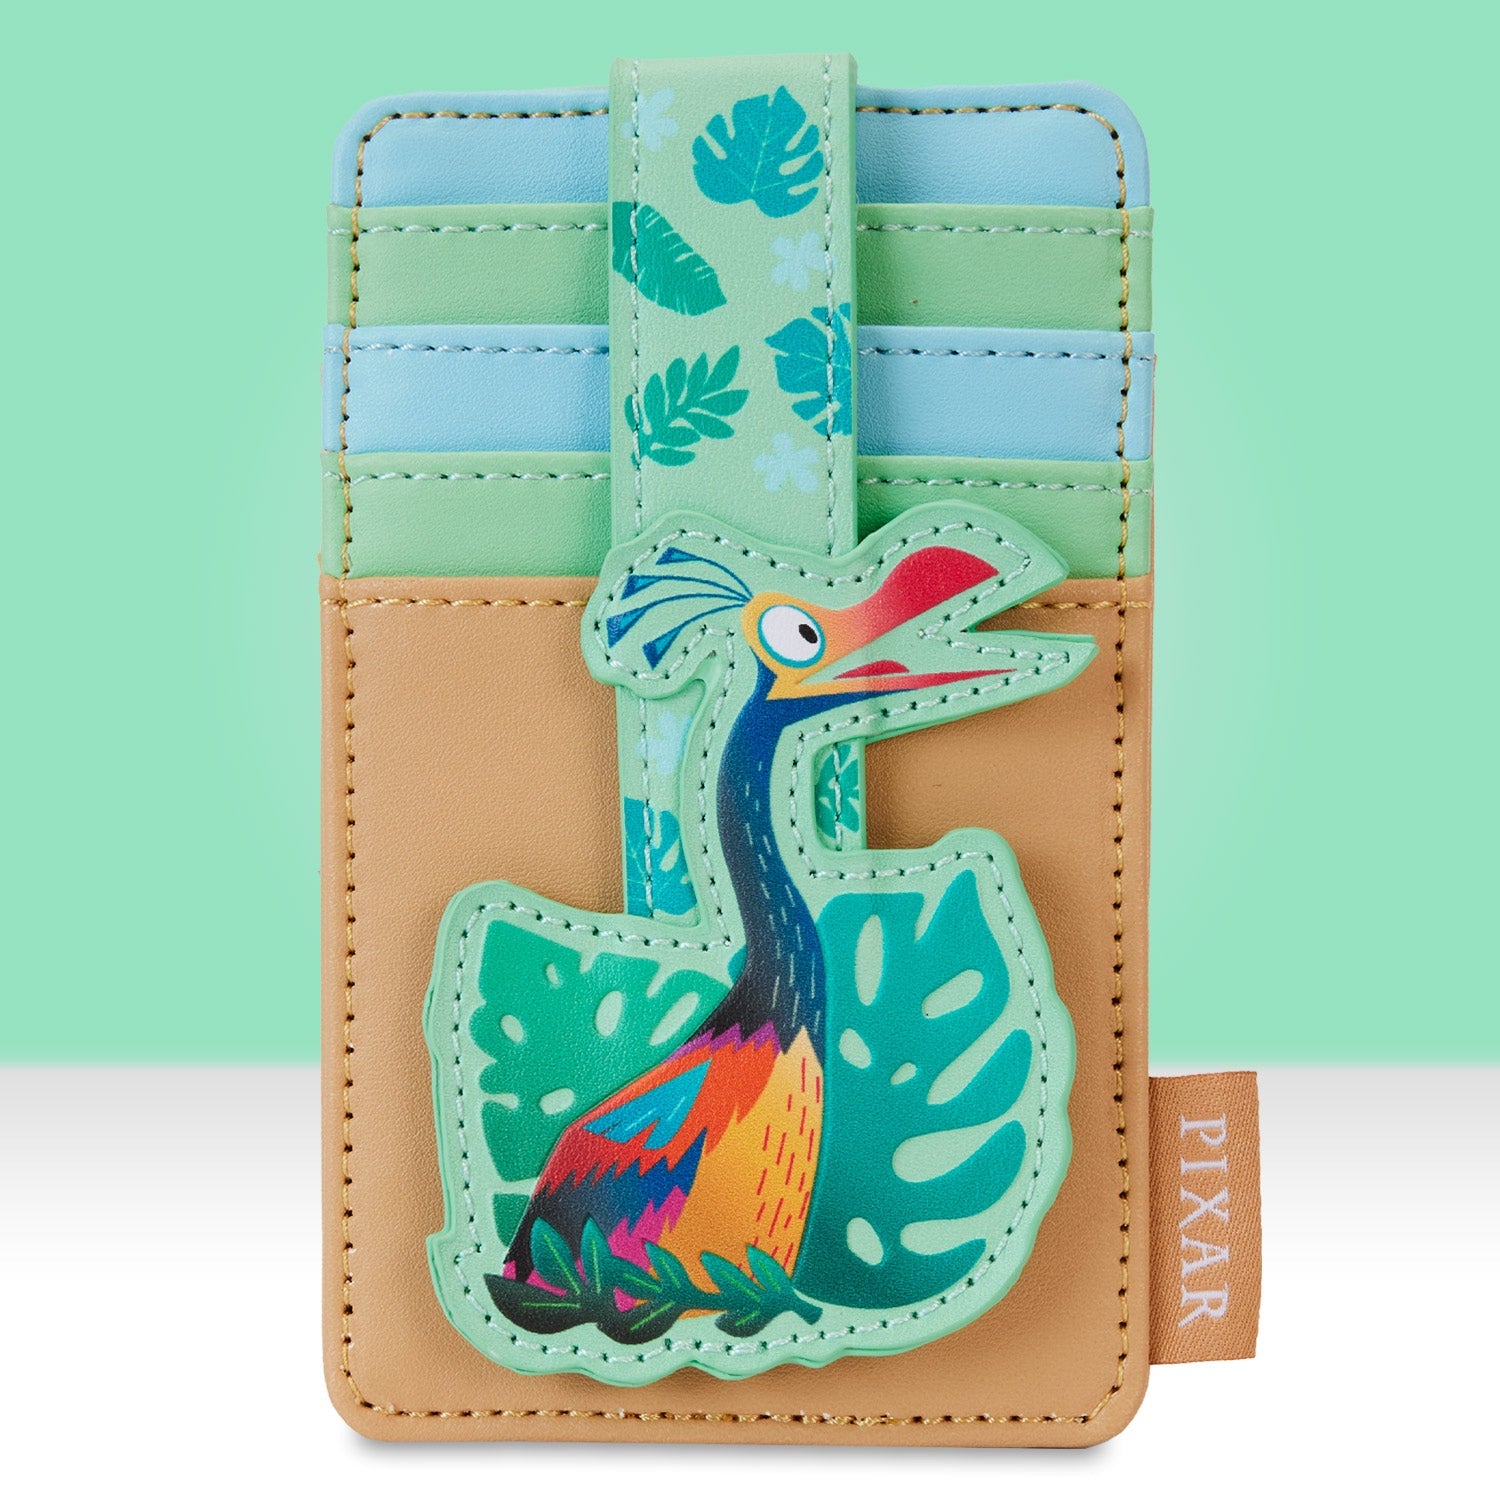 Loungefly x Disney Pixar Up 15th Anniversary Kevin Card Holder - GeekCore